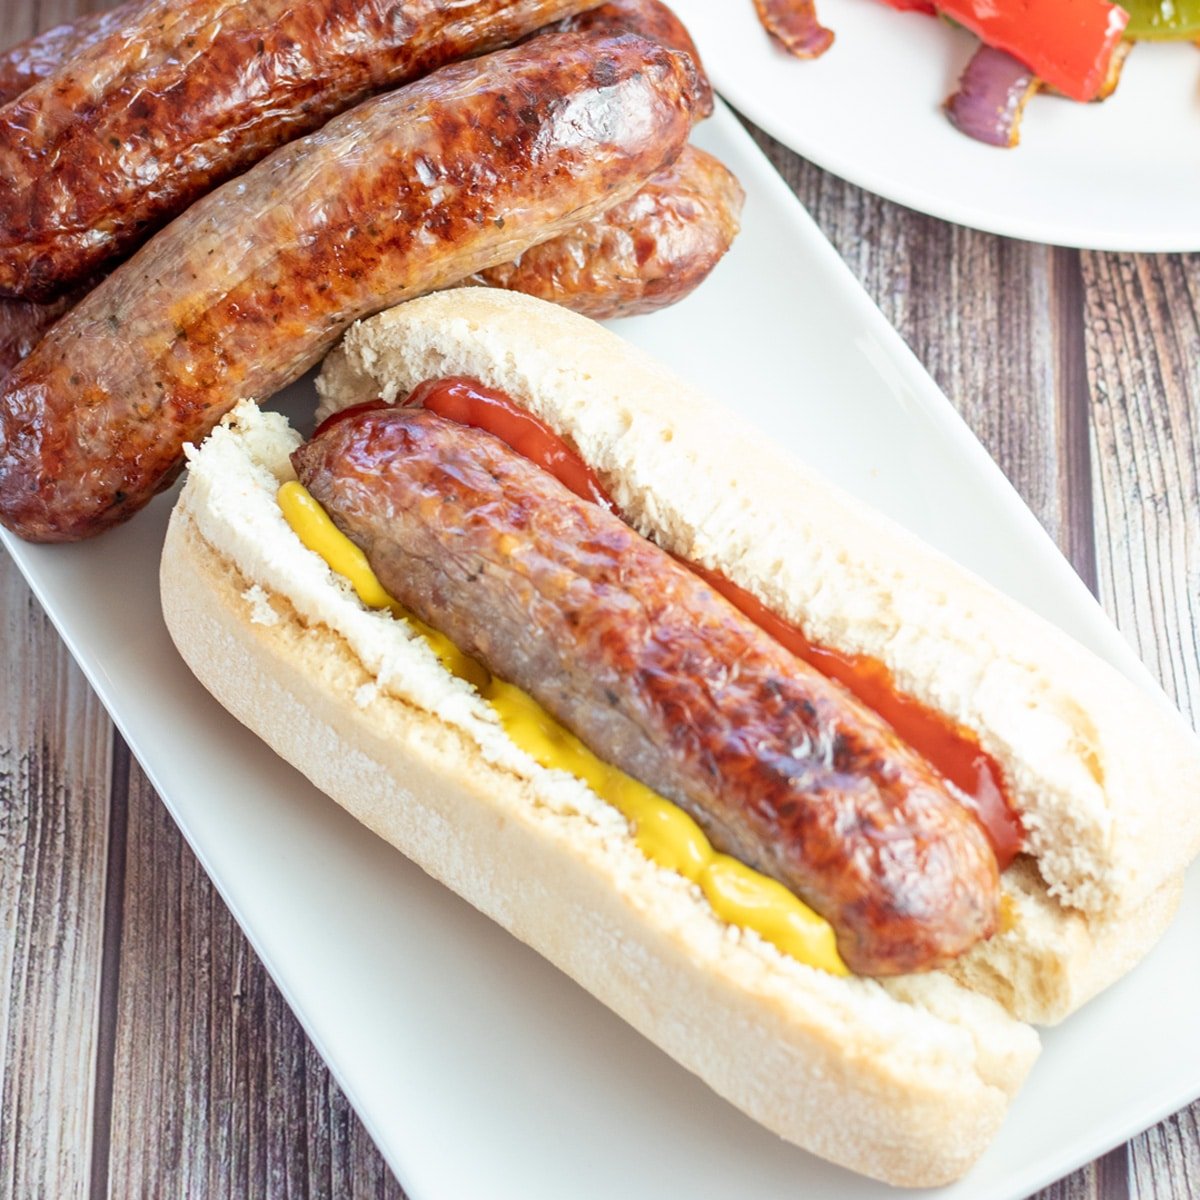 Best air fryer Italian sausage cooked to perfection and served in buns.